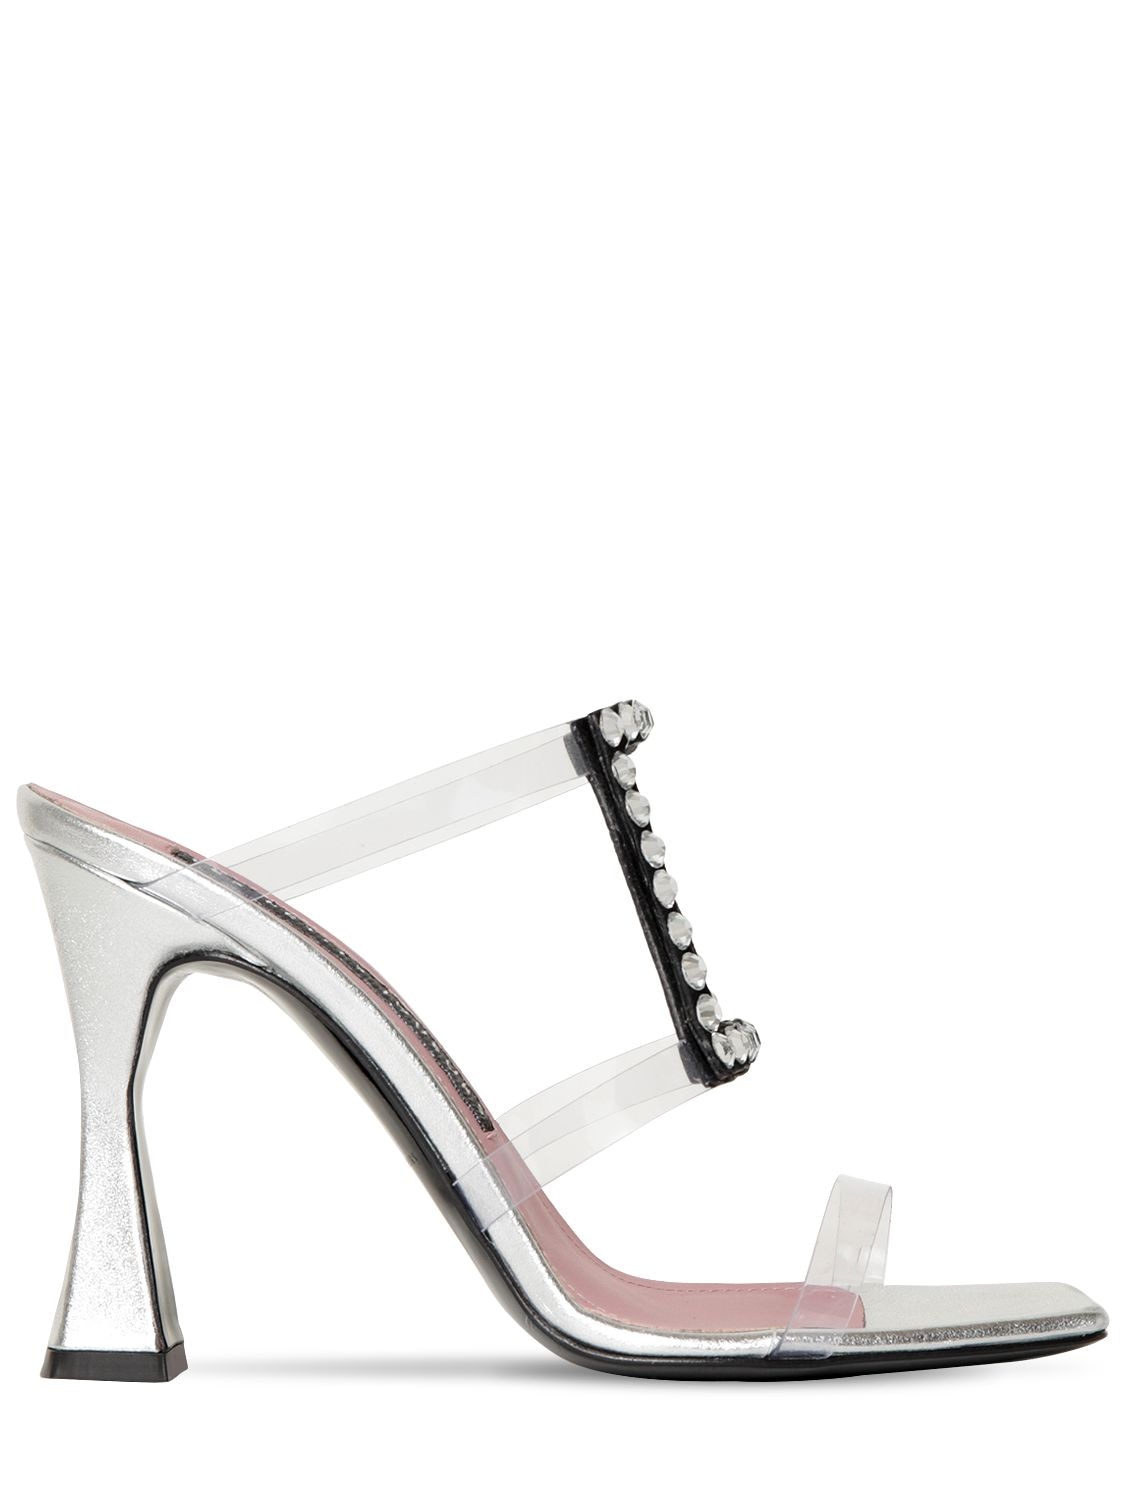 Les Petits Joueurs 100mm Crystal Embellished Pvc Sandals In Silver